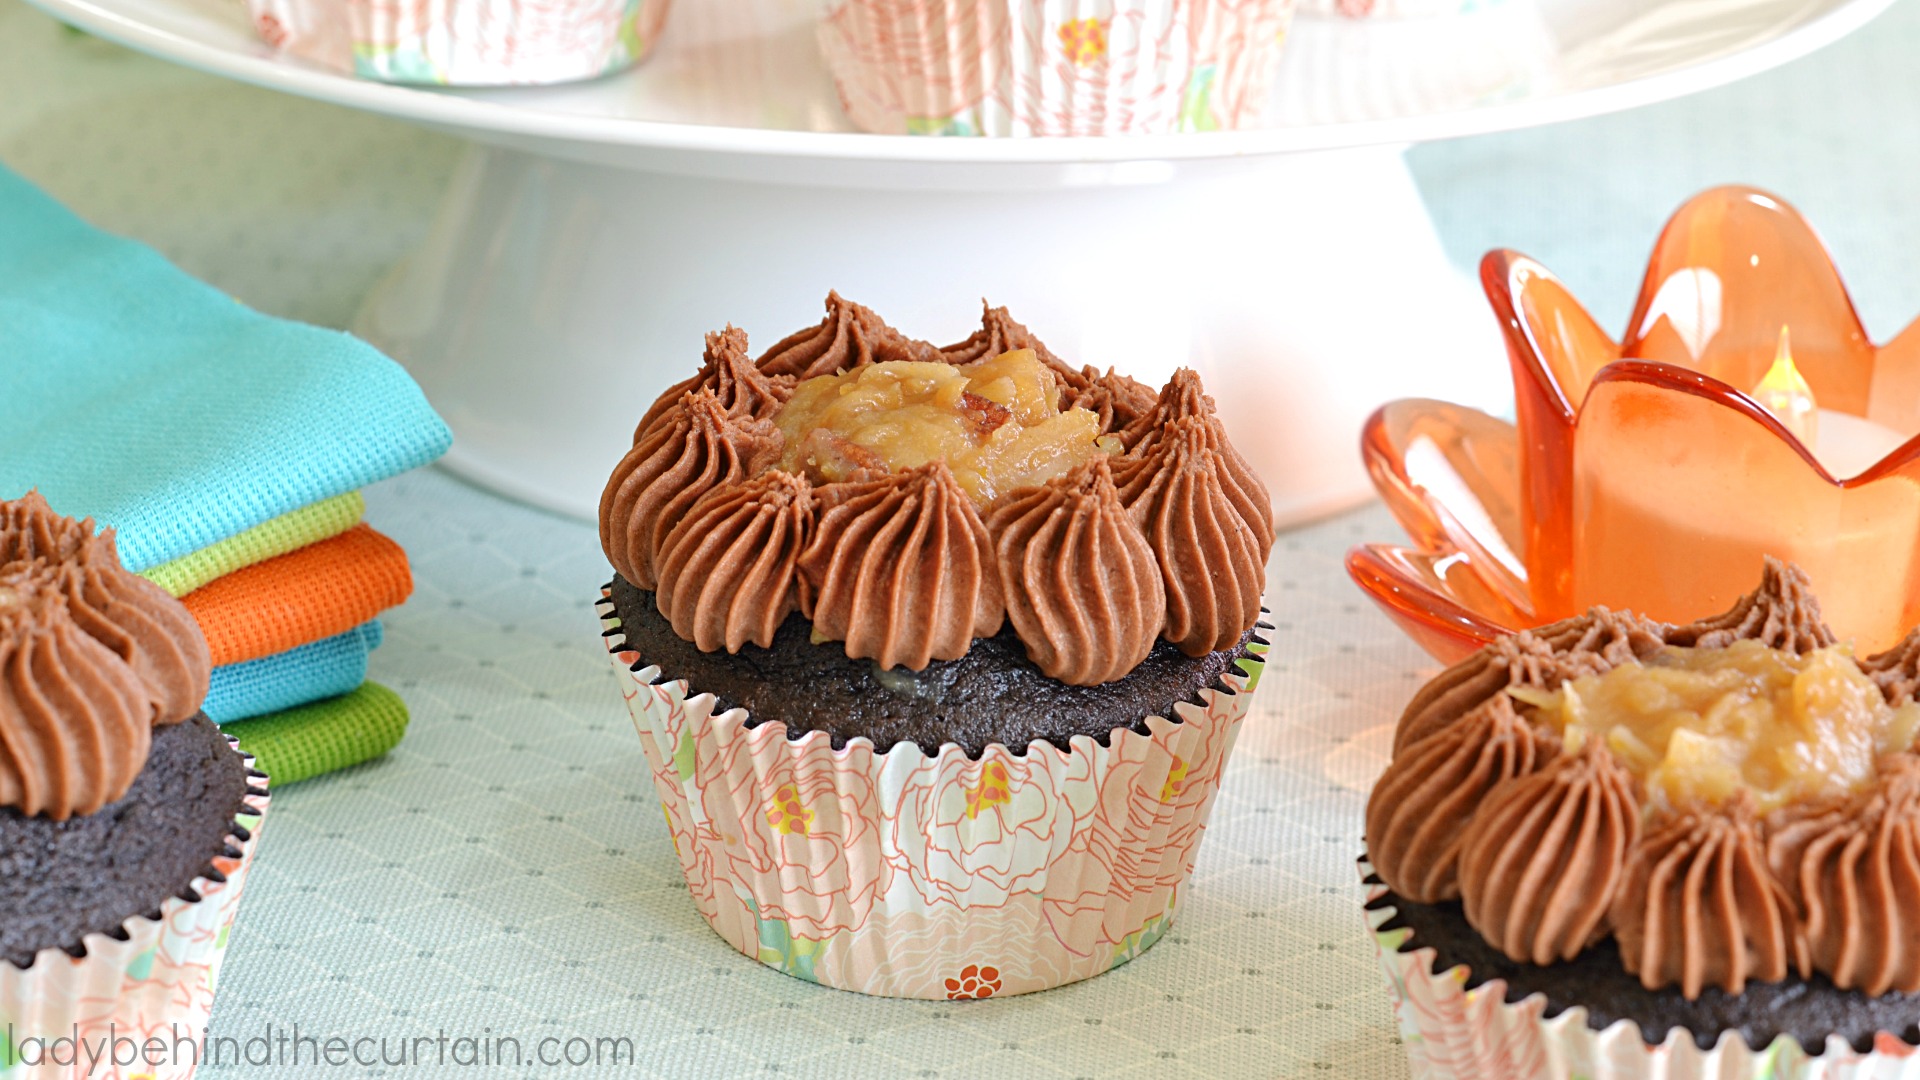 German Chocolate Cupcakes | A deep chocolate cupcake filled with the delicious coconut frosting that we all love along with a creamy butter chocolate frosting. The perfect chocolate cupcake!